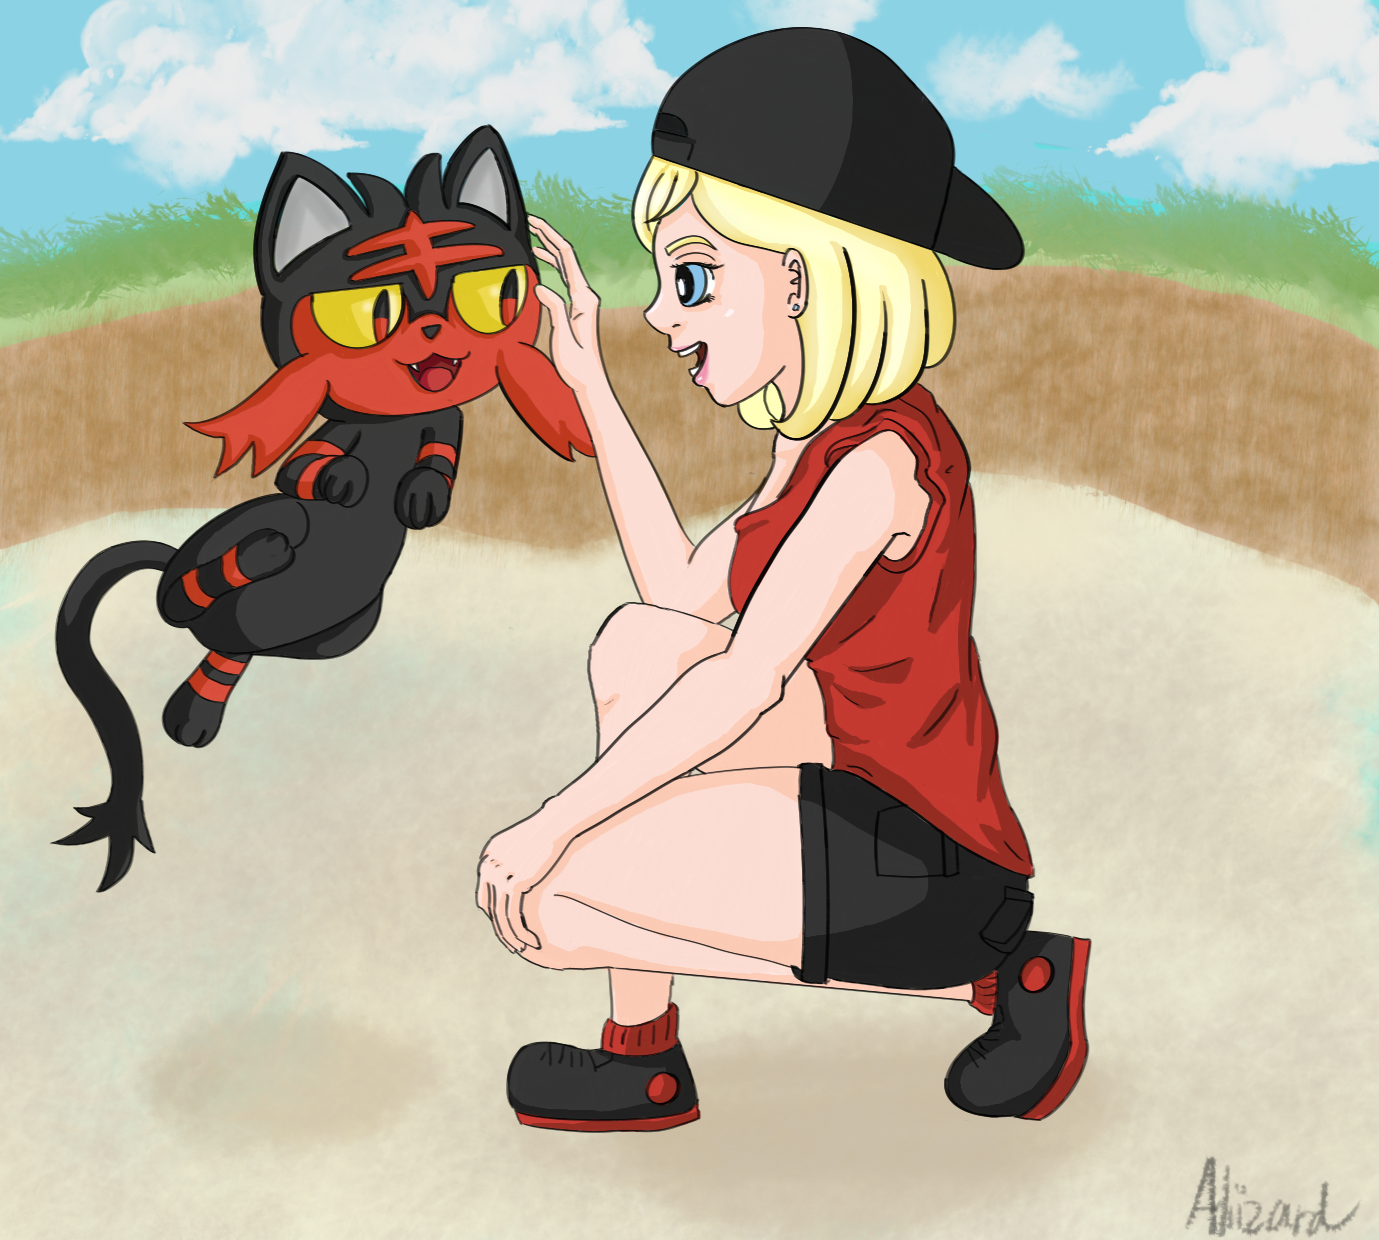 litten_and_alolan_trainer_by_deizy-dbuheqh.png